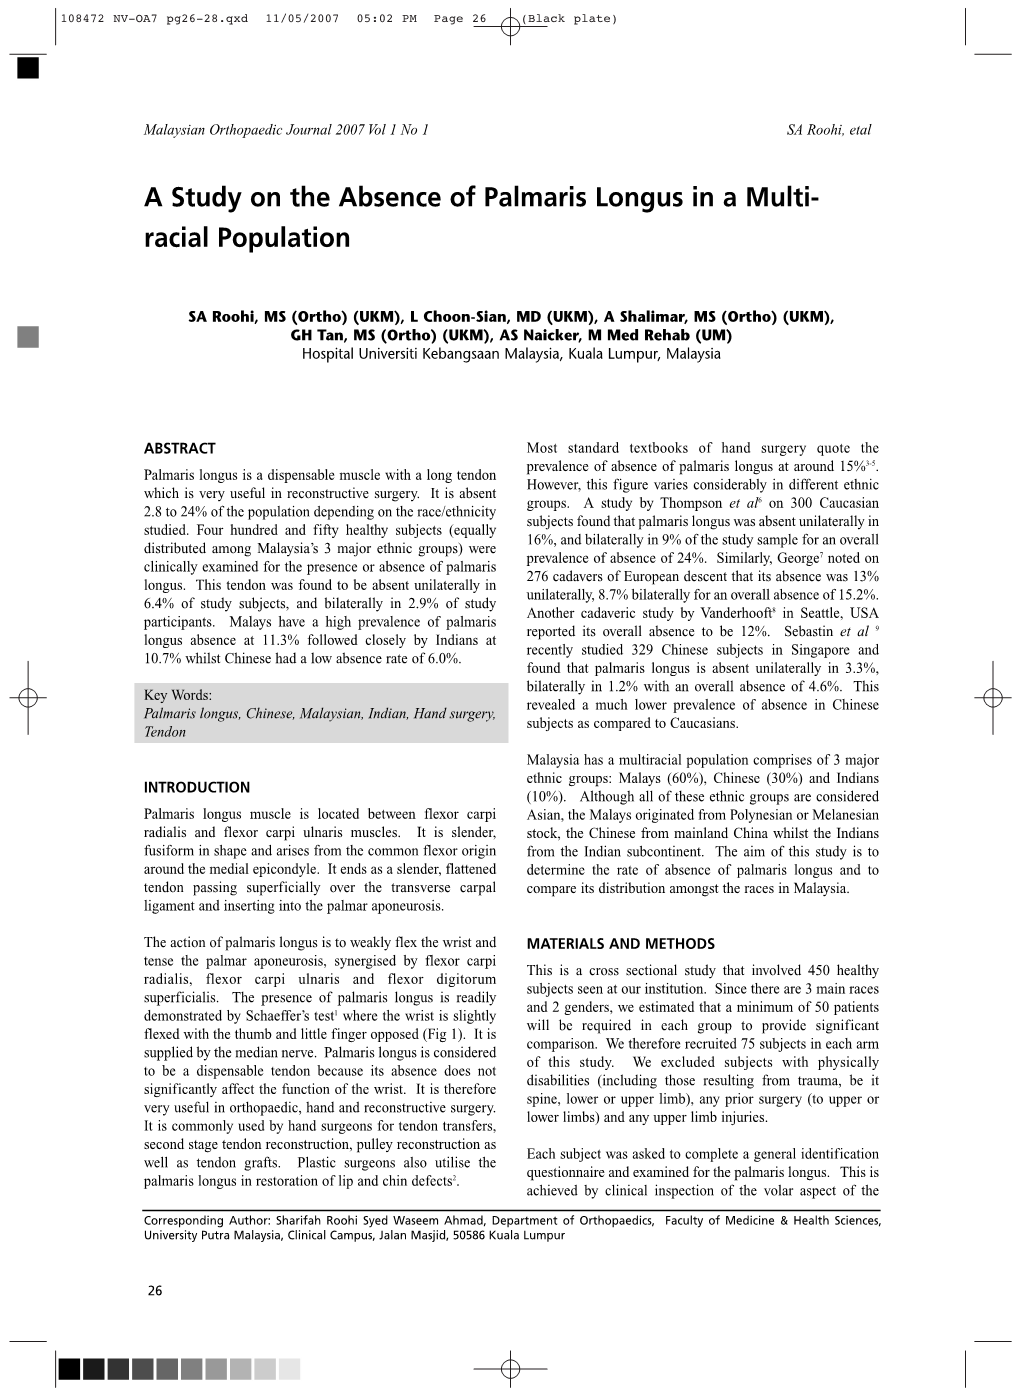 A Study on the Absence of Palmaris Longus in a Multi-Racial Population